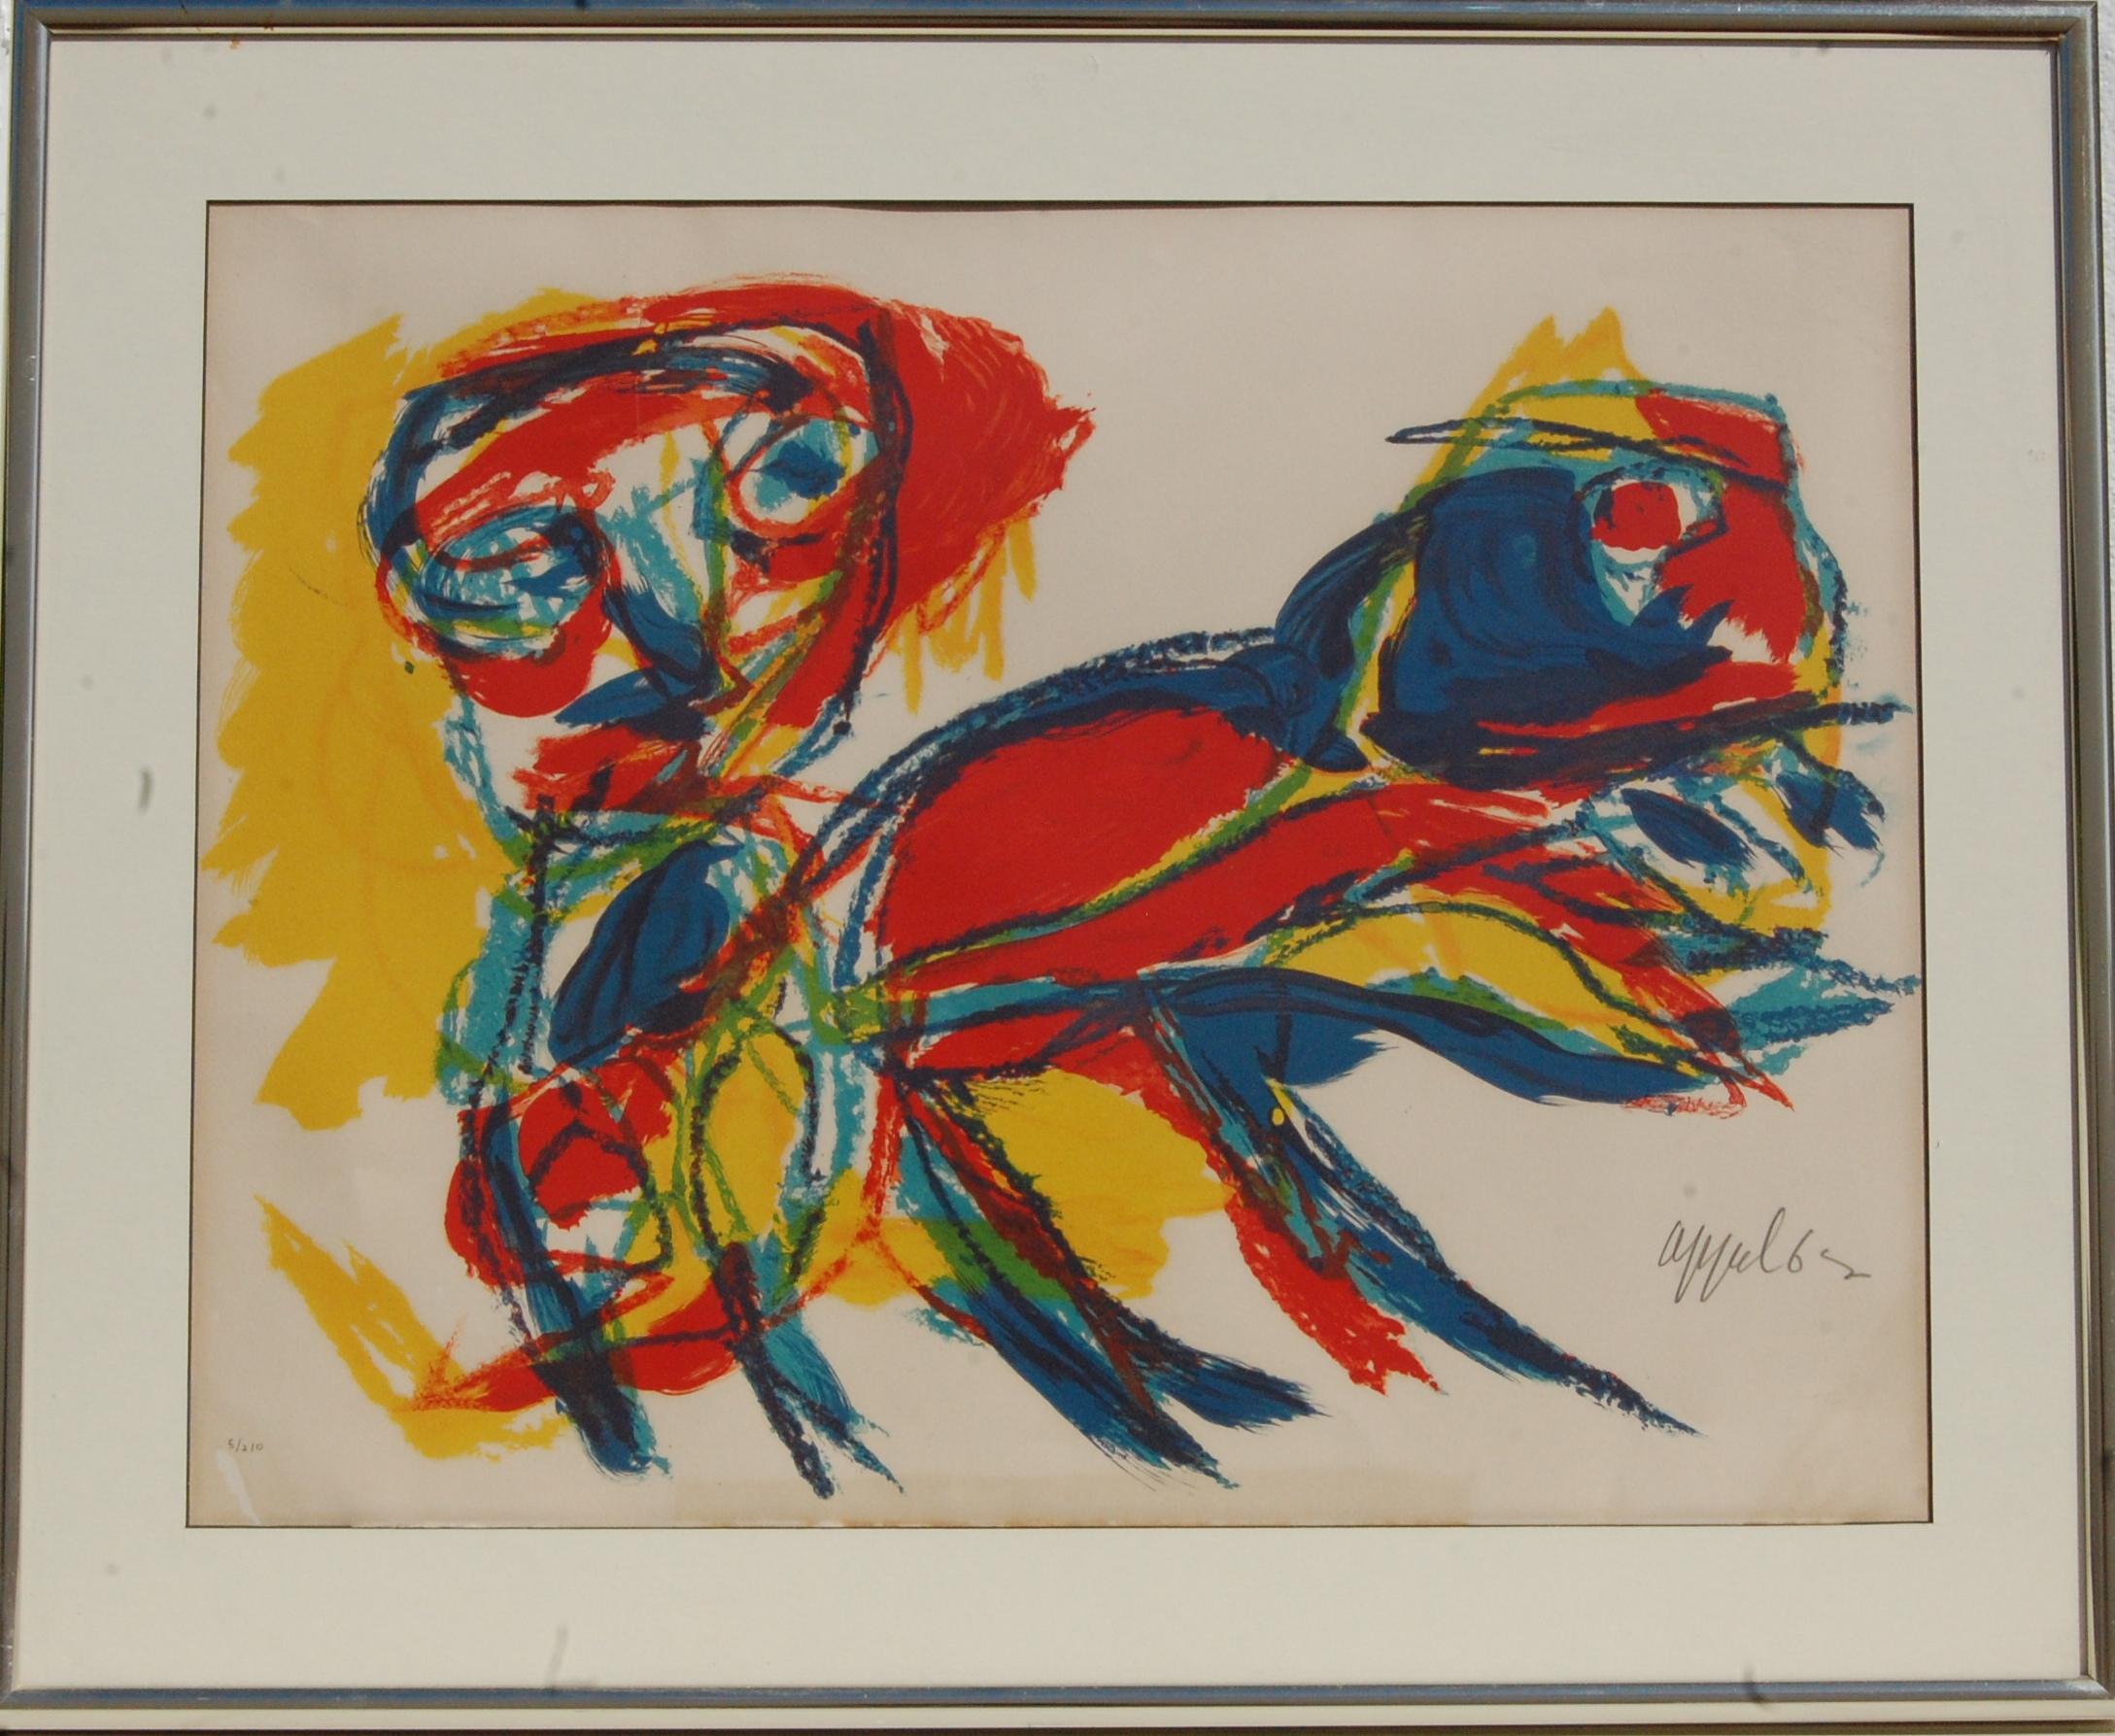   Abstract Expressionist Color Lithograph - Print by Karel Appel